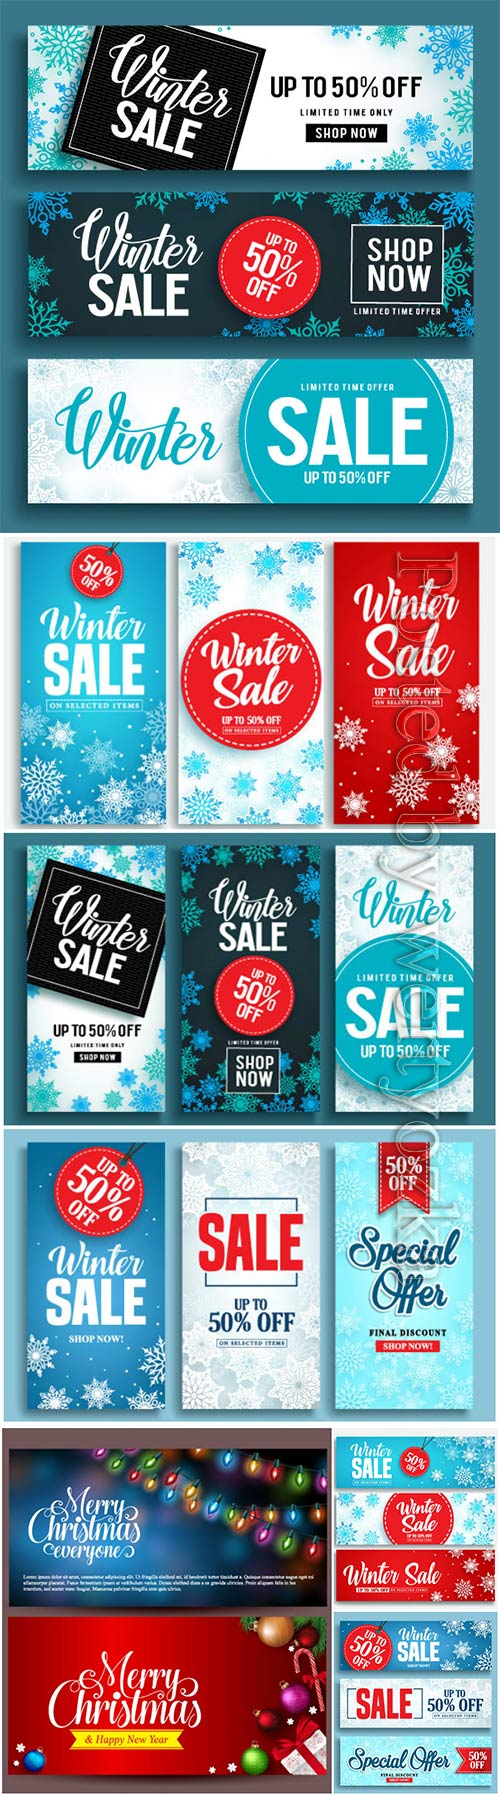 Winter sale vector banner set with discount text